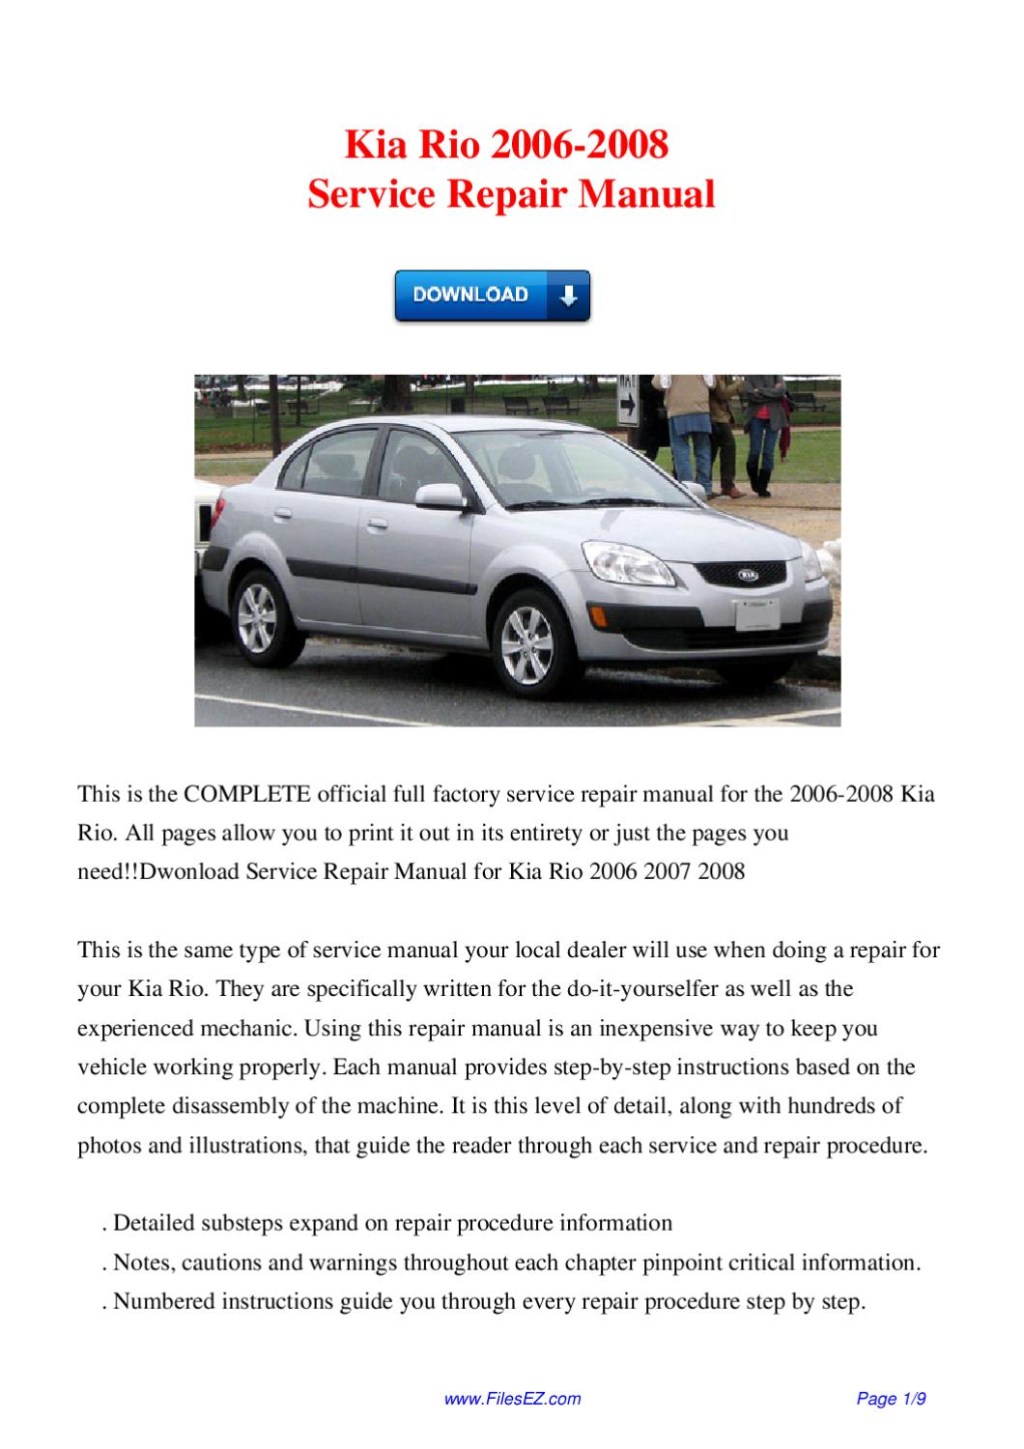 Picture of: Kia Rio – Service Repair Manual by David Wong – Issuu